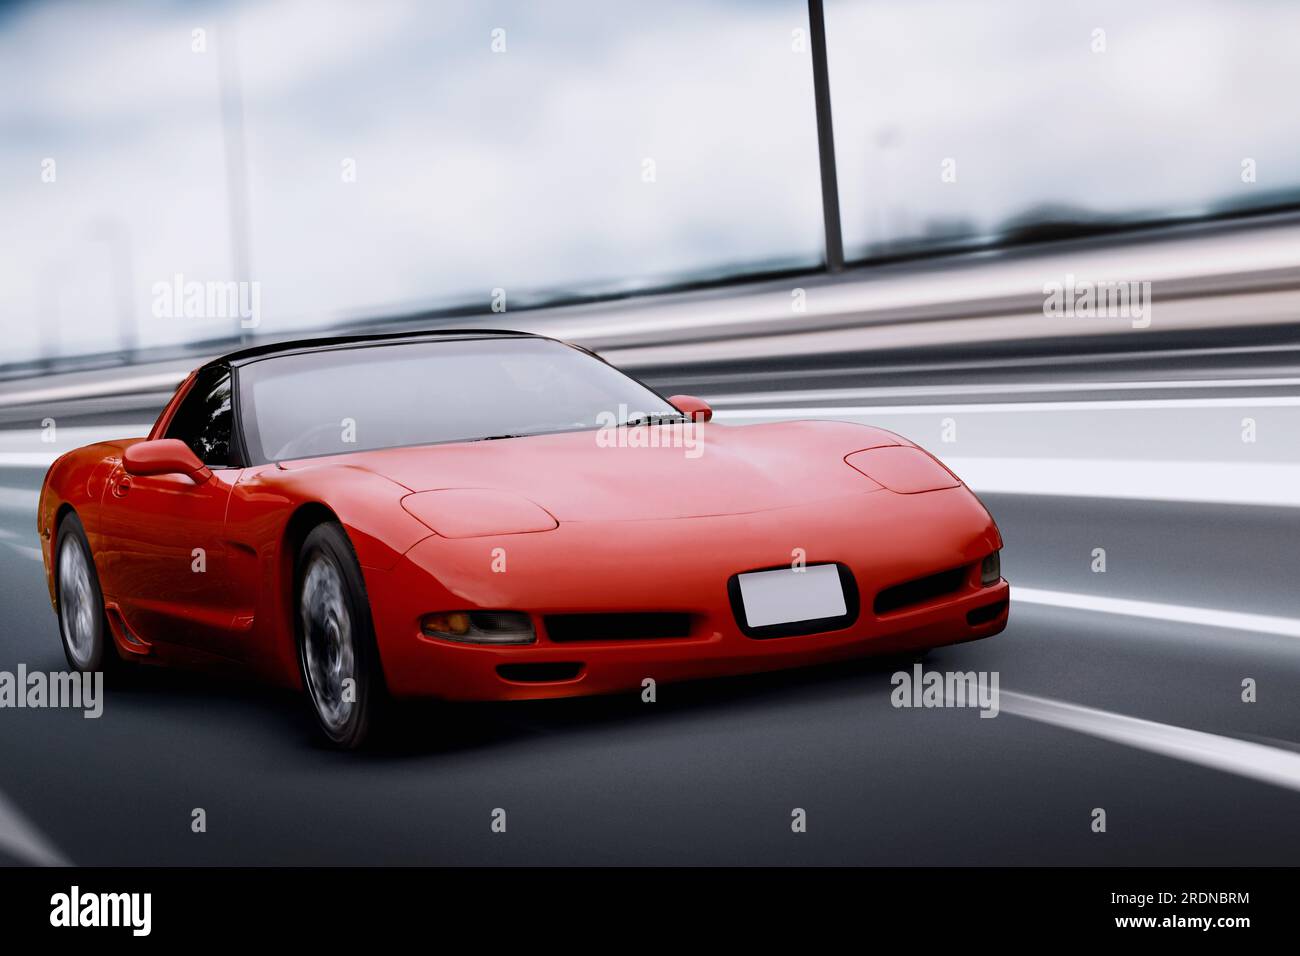 Izmir, Turkey - June 3, 2023: An image capturing the dynamic speed of a red 2000 Chevrolet Corvette racing down the highway. Stock Photo